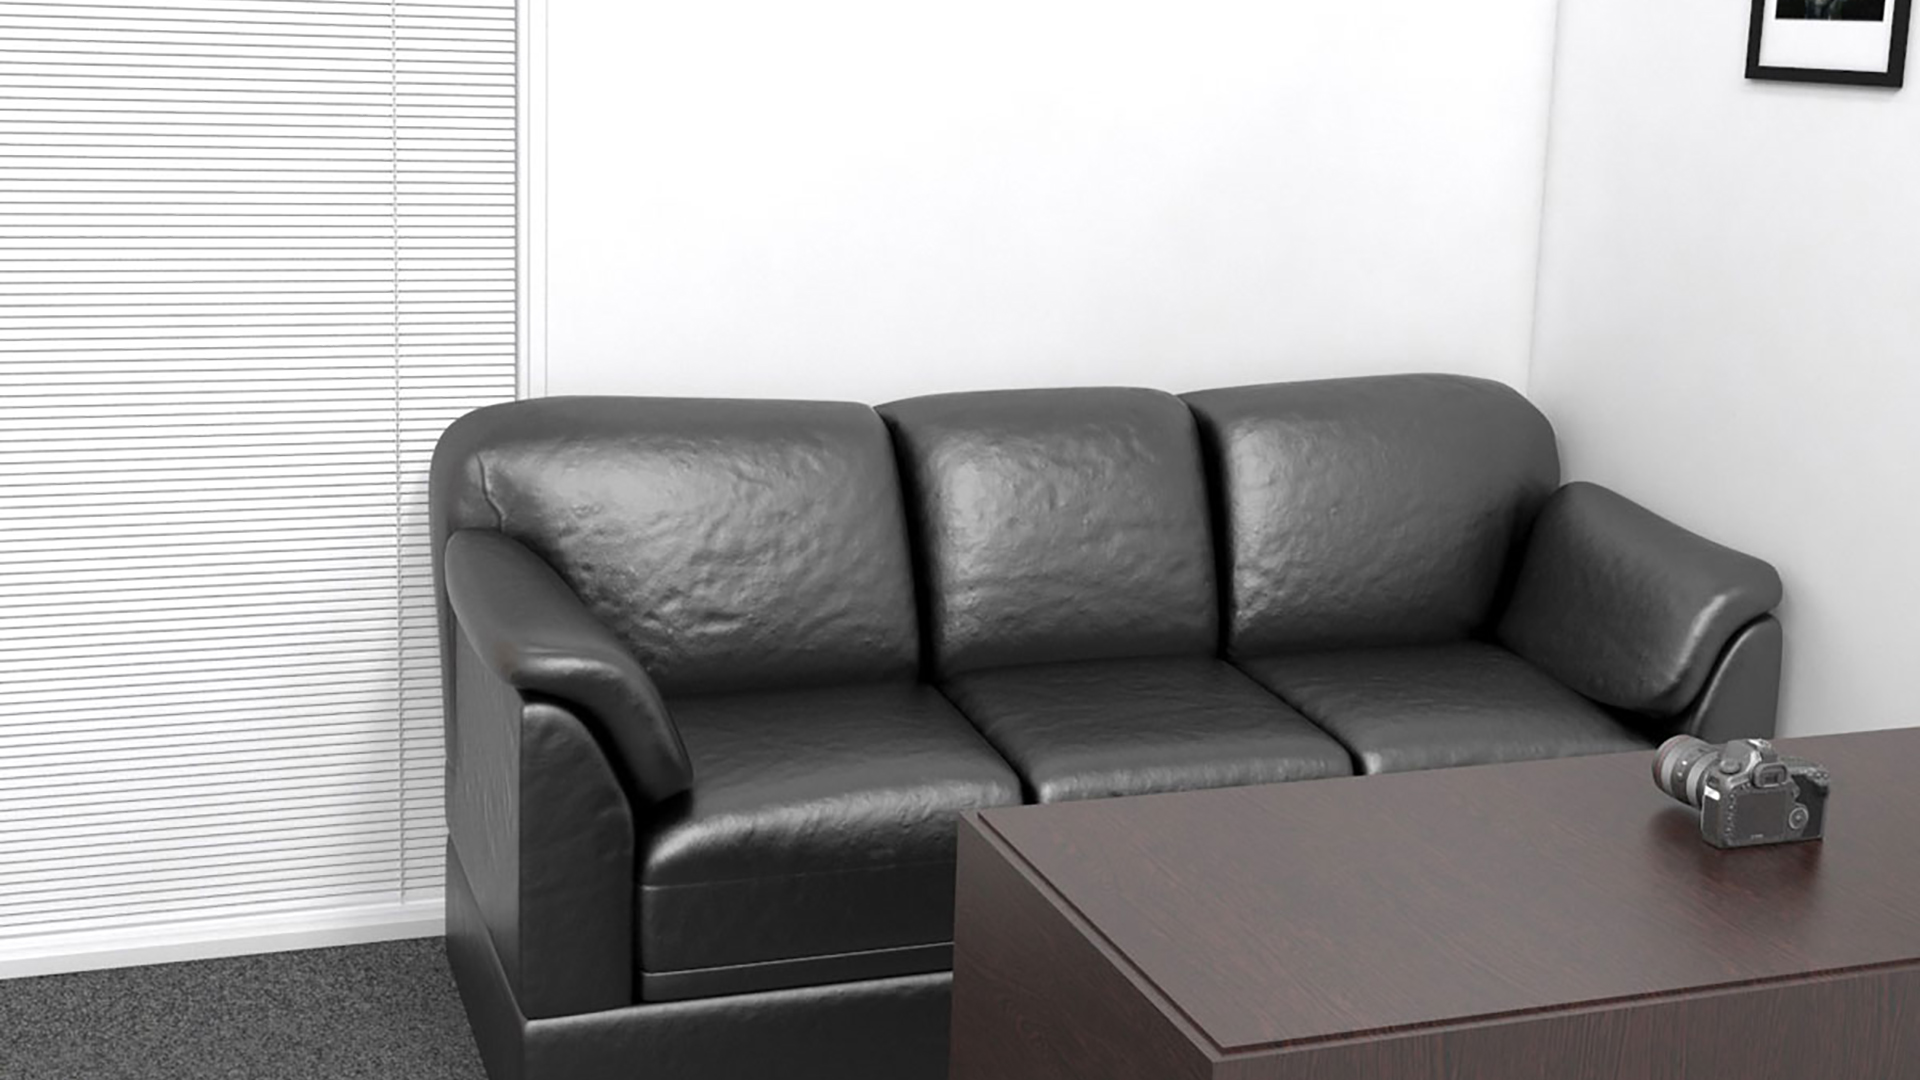 Casting couch. Virtual background to use on Zoom, Microsoft Teams, Skype, Google Meet, WebEx or any other compatible app.